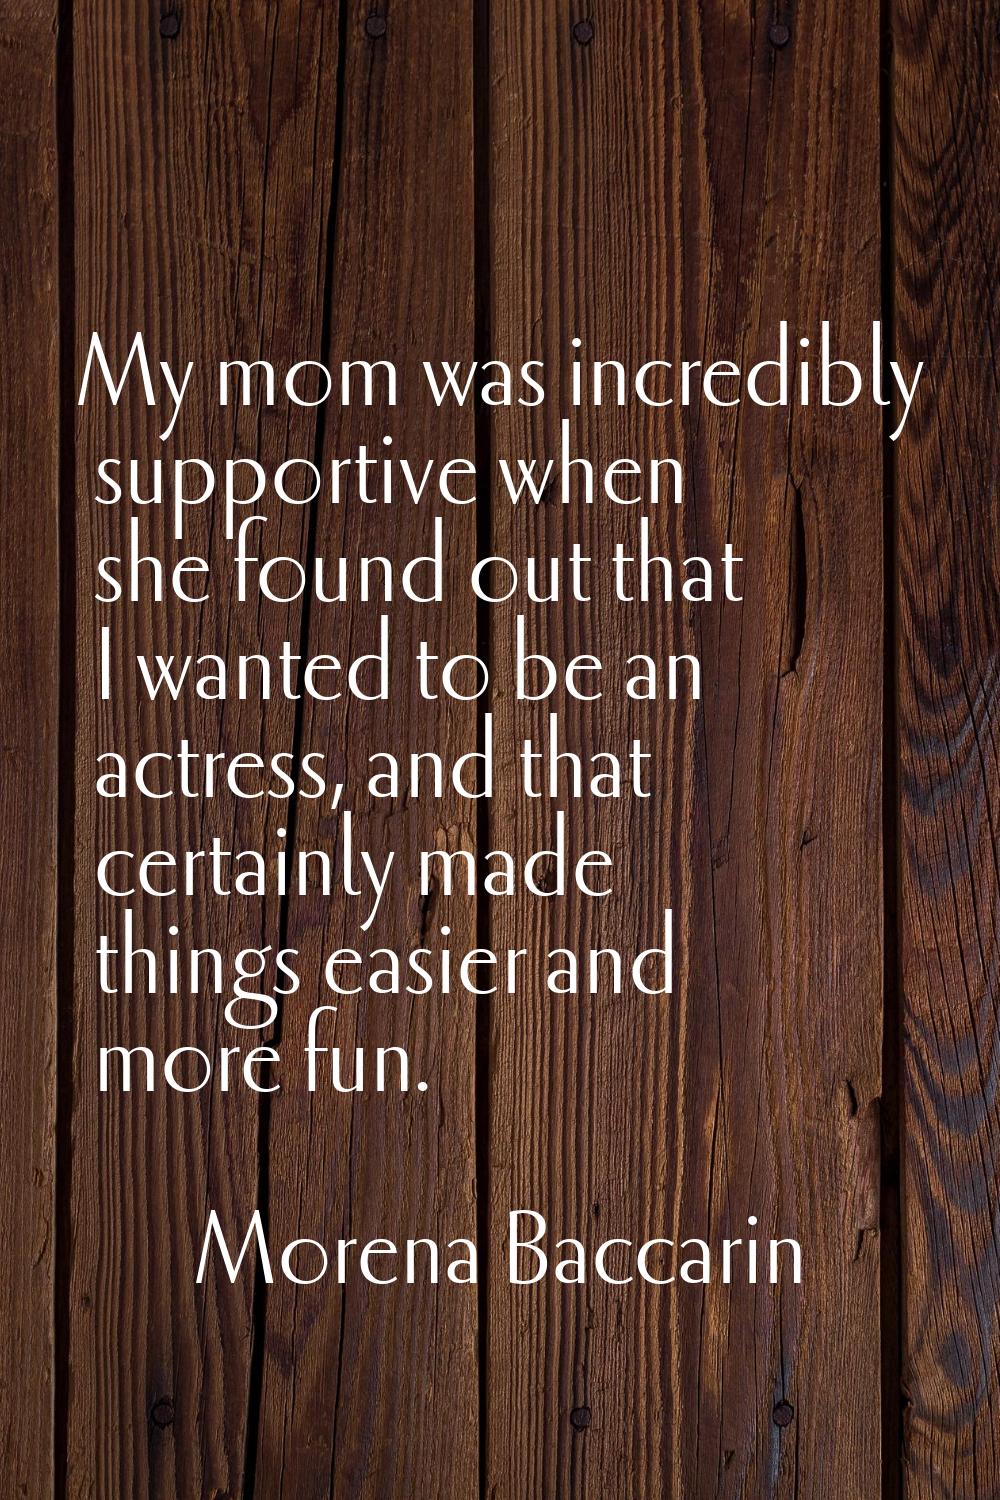 My mom was incredibly supportive when she found out that I wanted to be an actress, and that certai